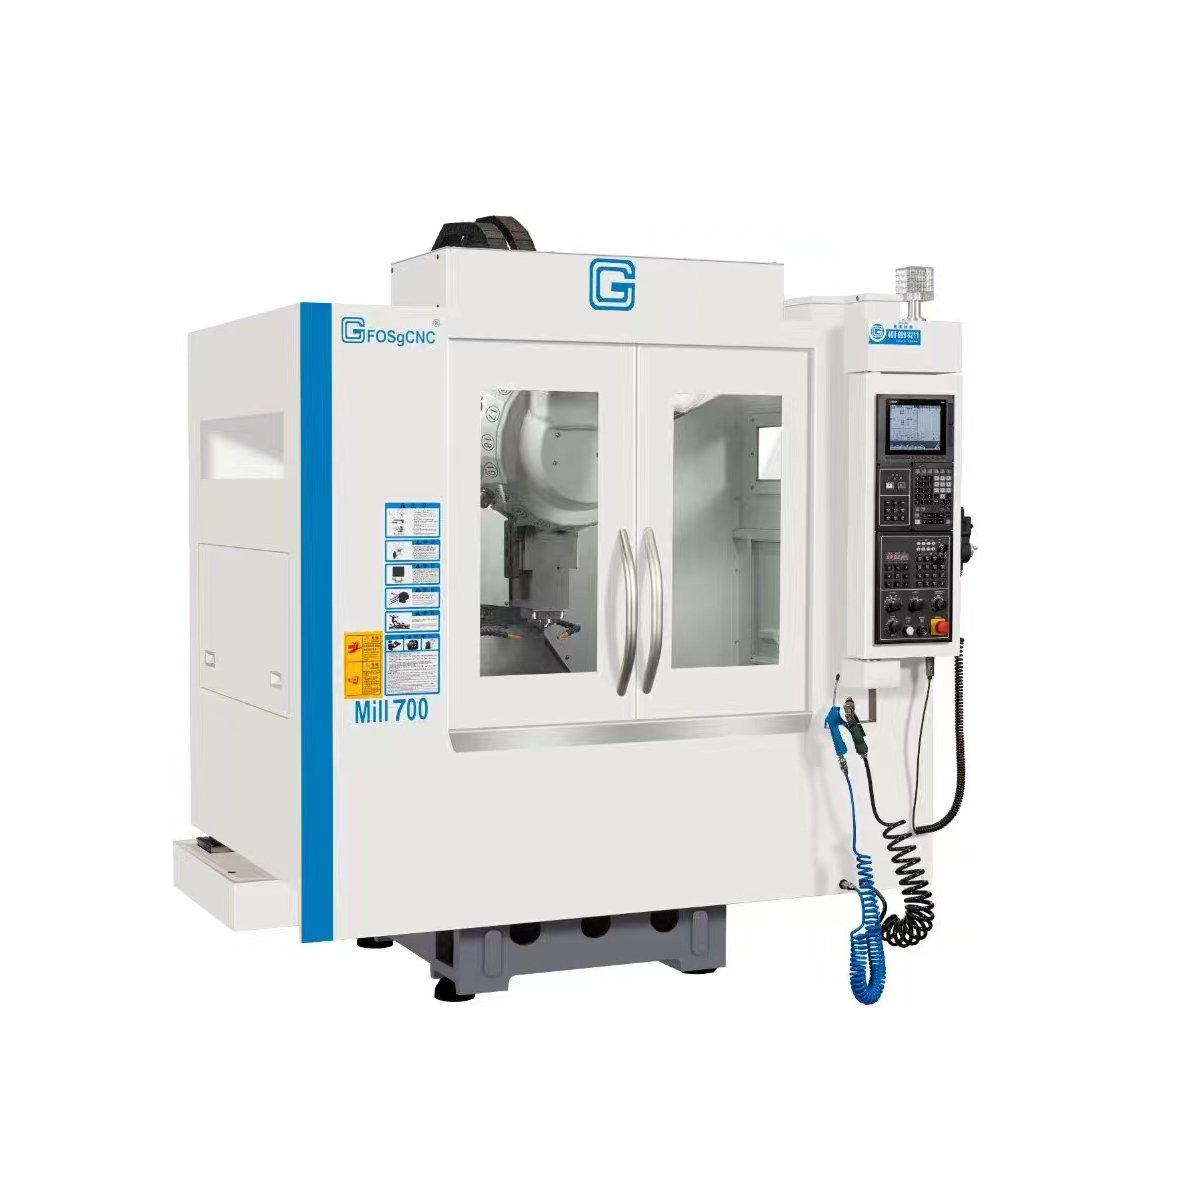 Mill 700 high-precision high-speed drilling and tapping machine